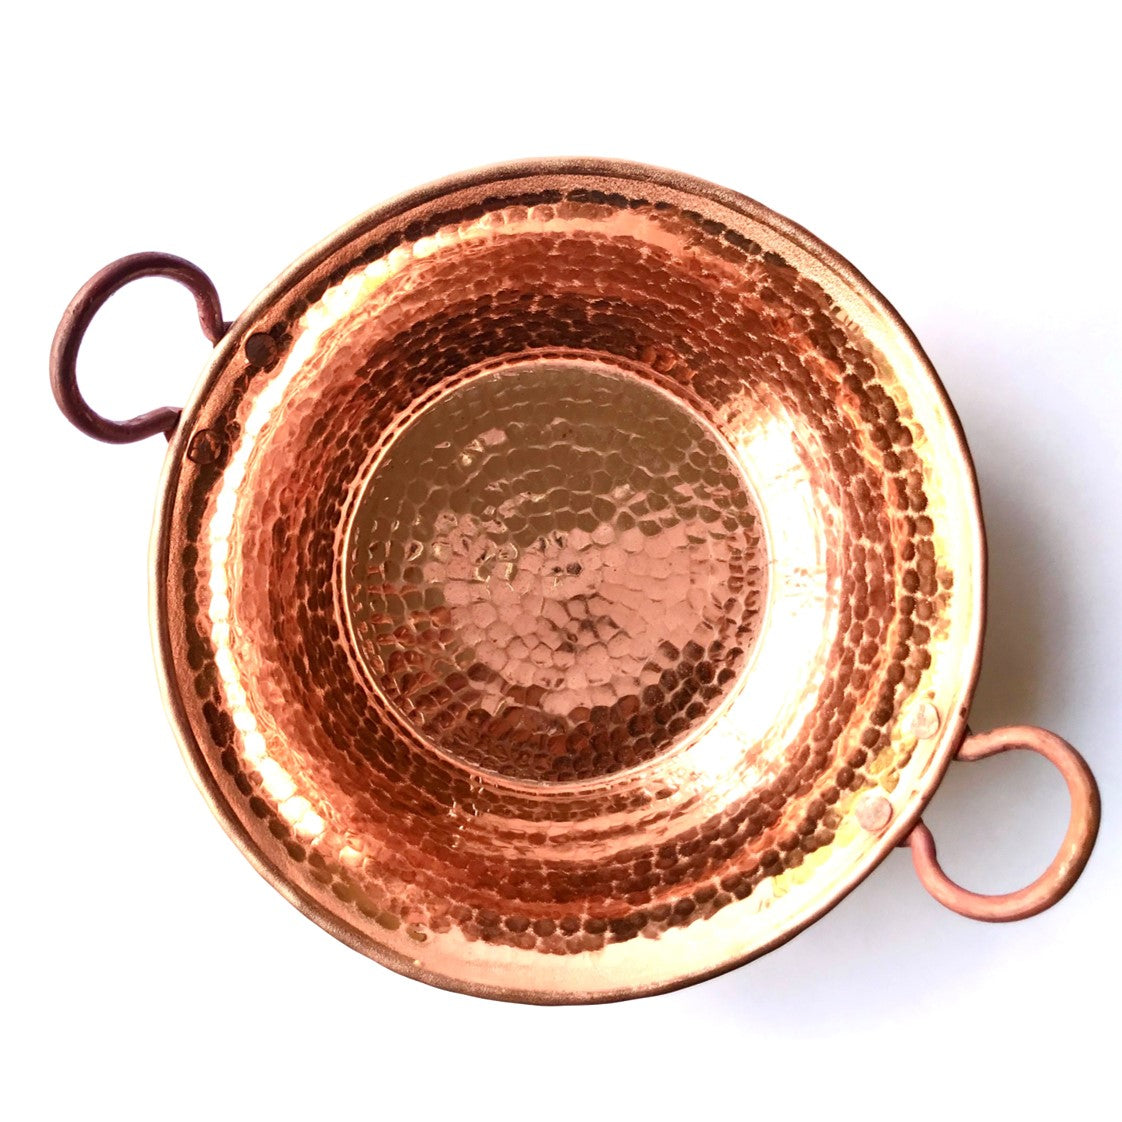 Mexico 1492: a magnifiscent shine of the copper cazo (pot), handmade by Michoacan master coppersmiths, carrying the tradition of their great-great grandfathers, since before the times of the conquest of Mexico. 